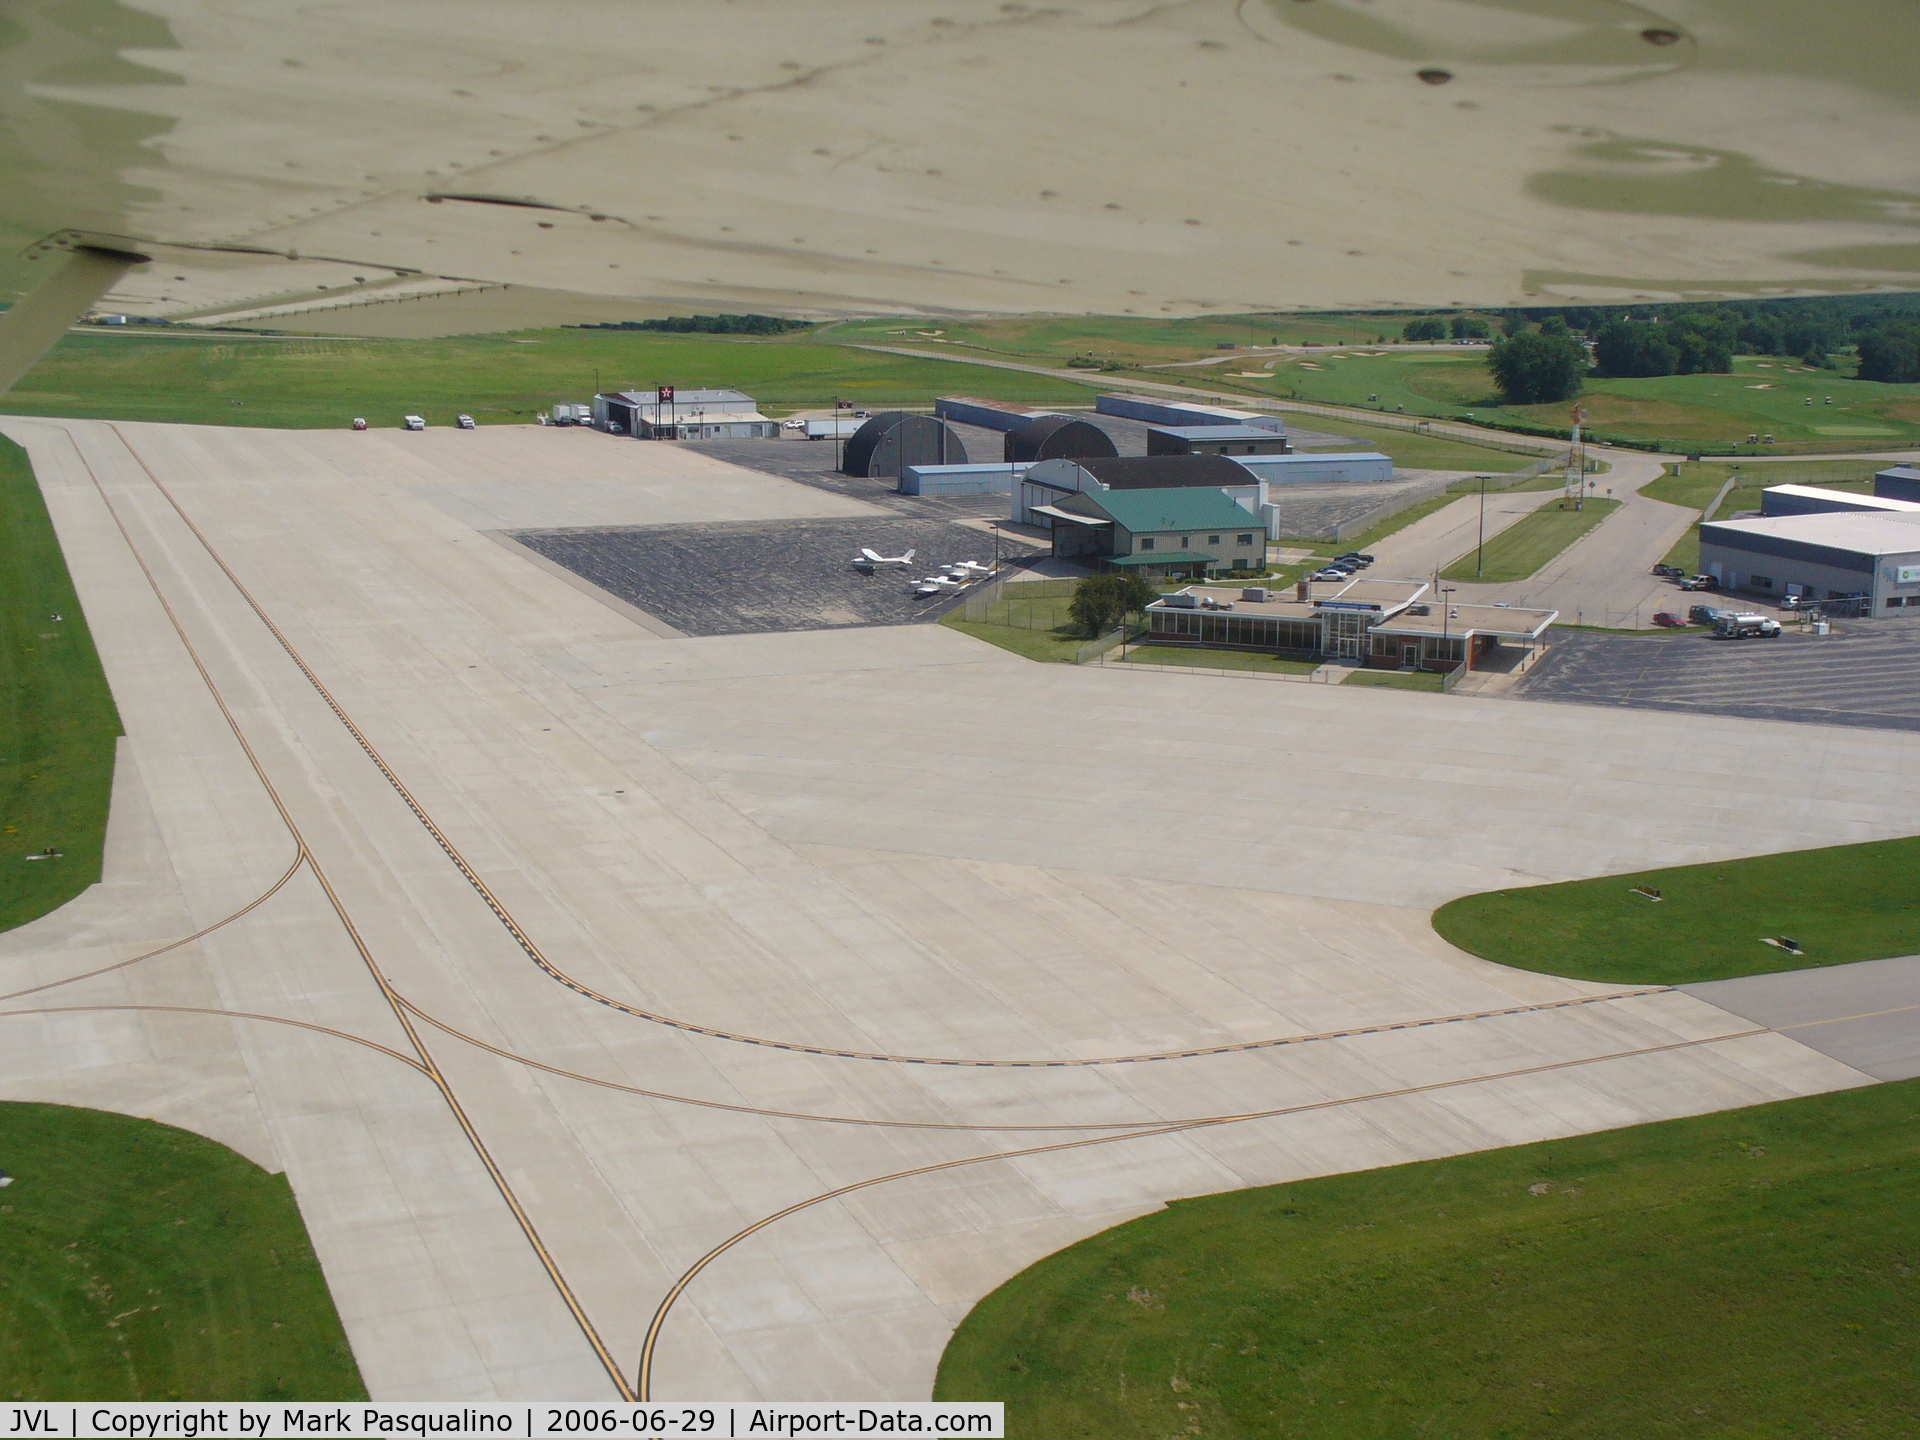 Southern Wisconsin Regional Airport (JVL) - Main Terminal and ramp